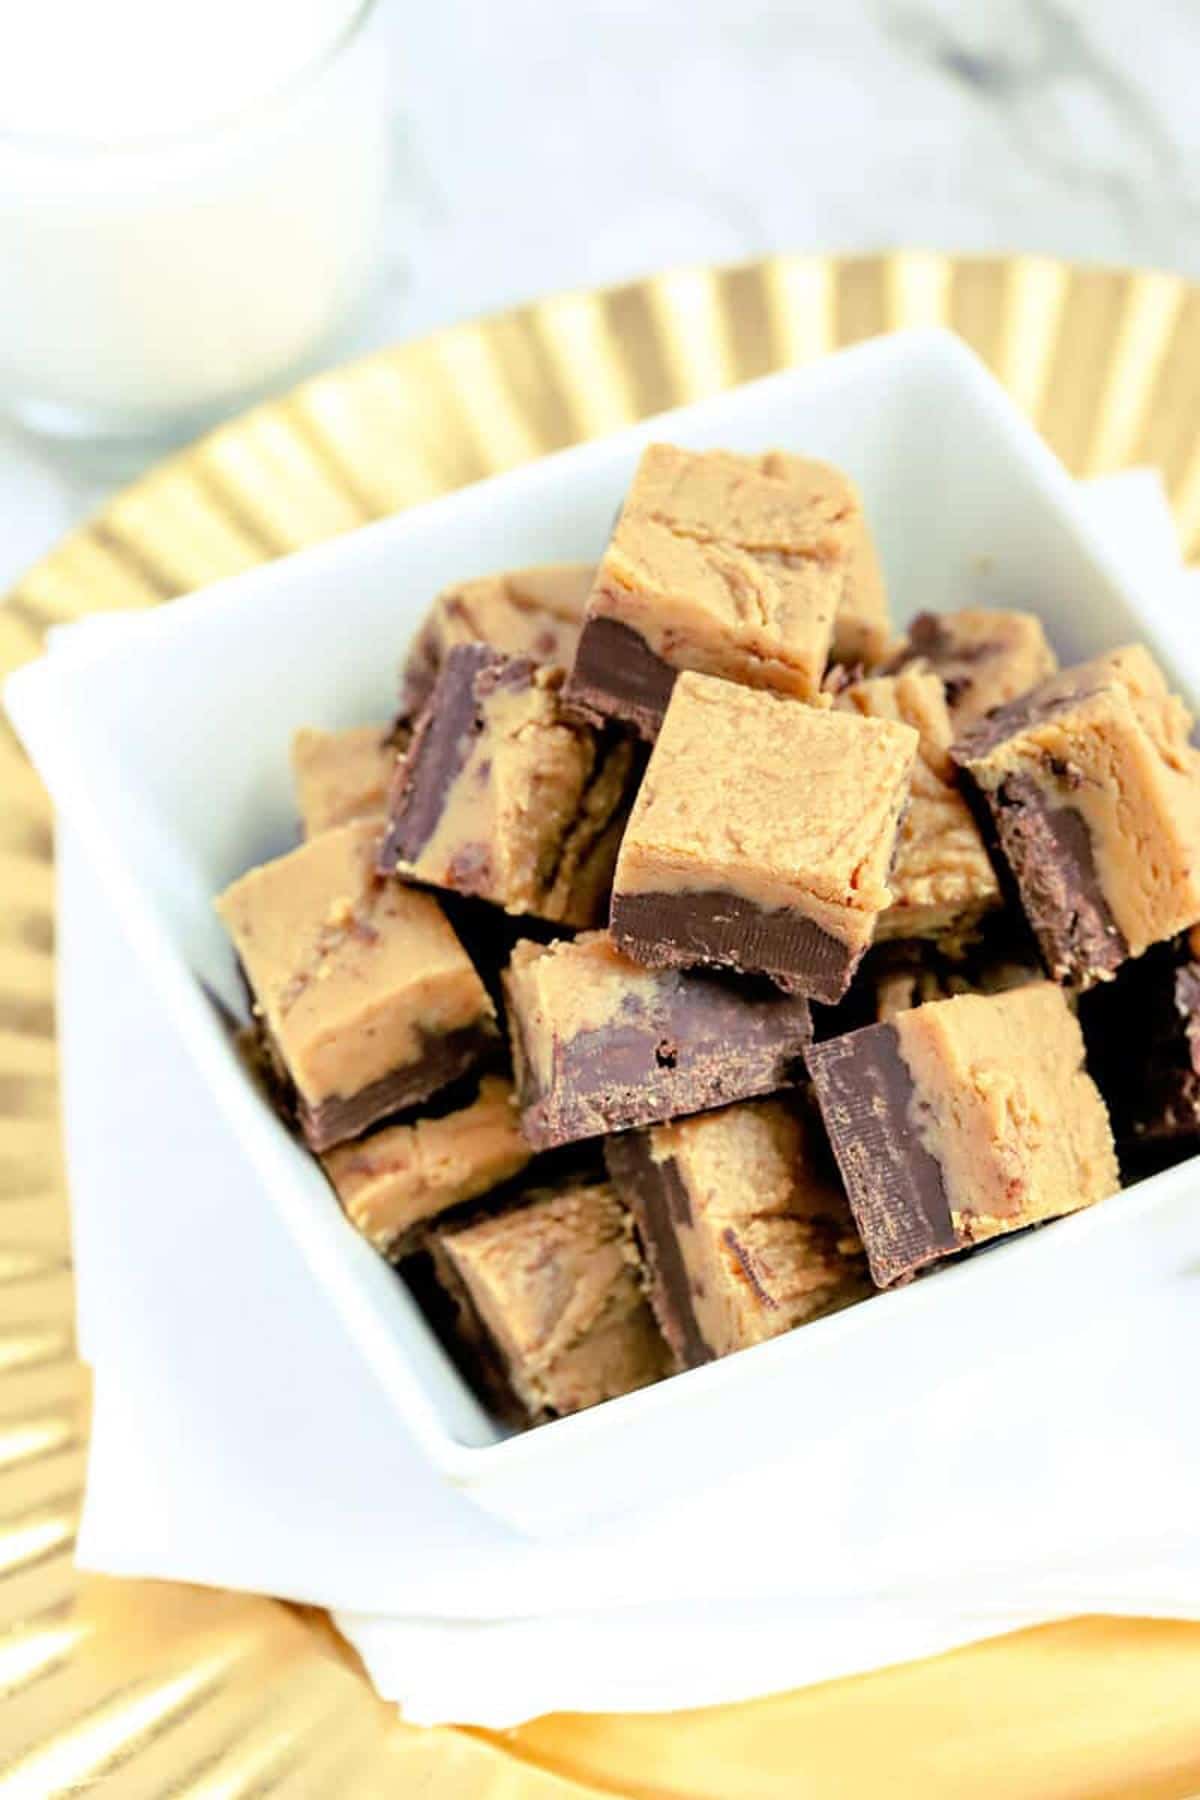 https://recipesworthrepeating.com/wp-content/uploads/2021/06/1-chocolate-peanut-butter-fudge-in-white-square-bowl-on-gold-tray.jpg